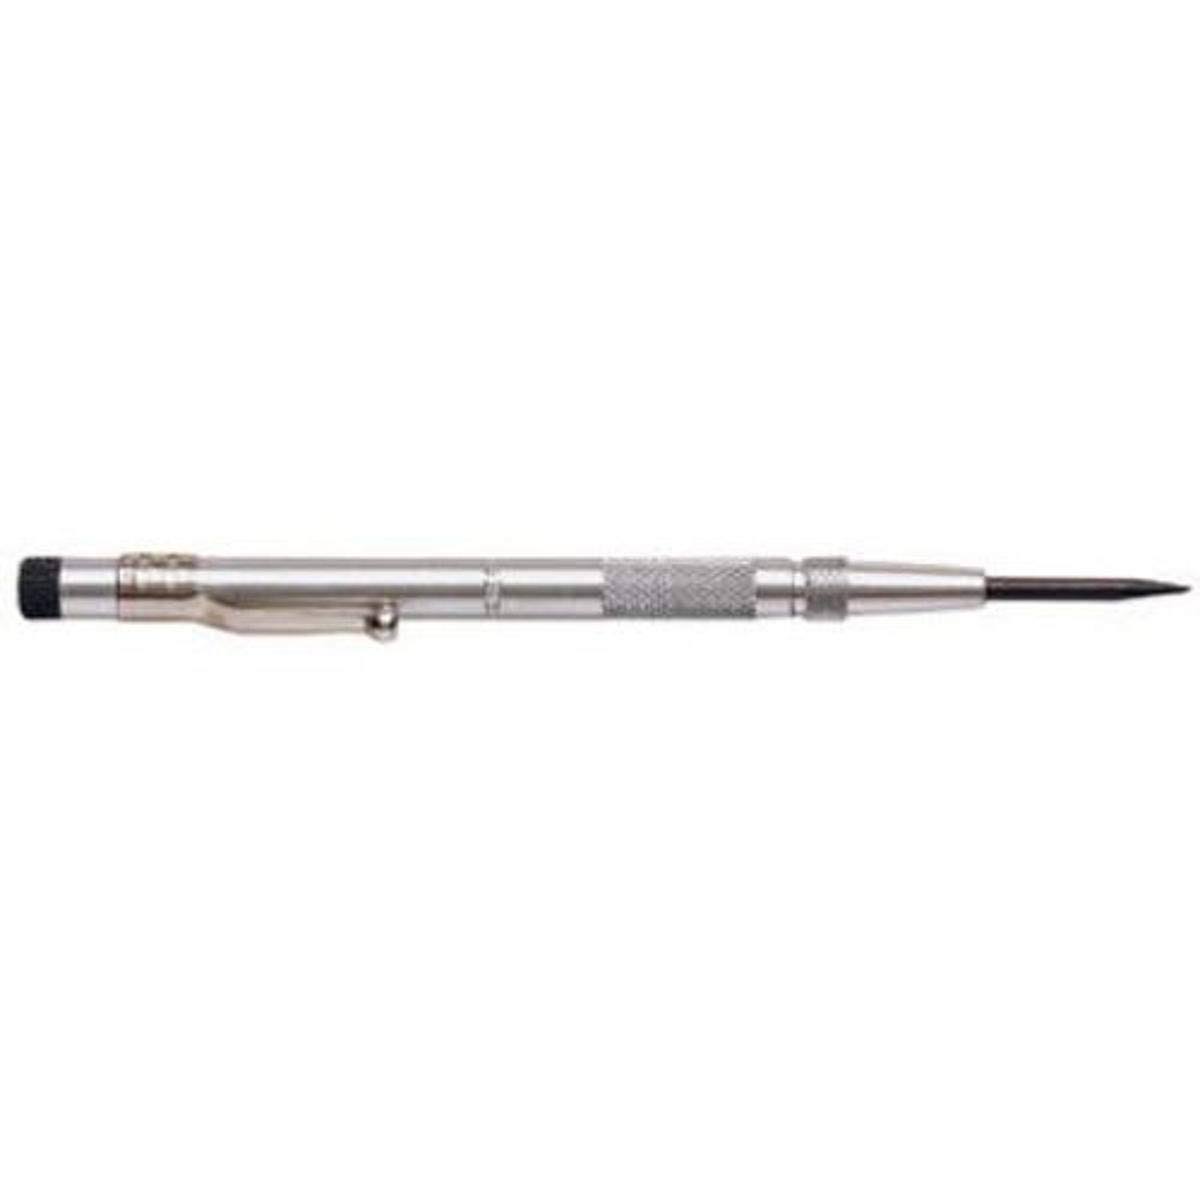 General Tools 87 Pocket Automatic Center Punch